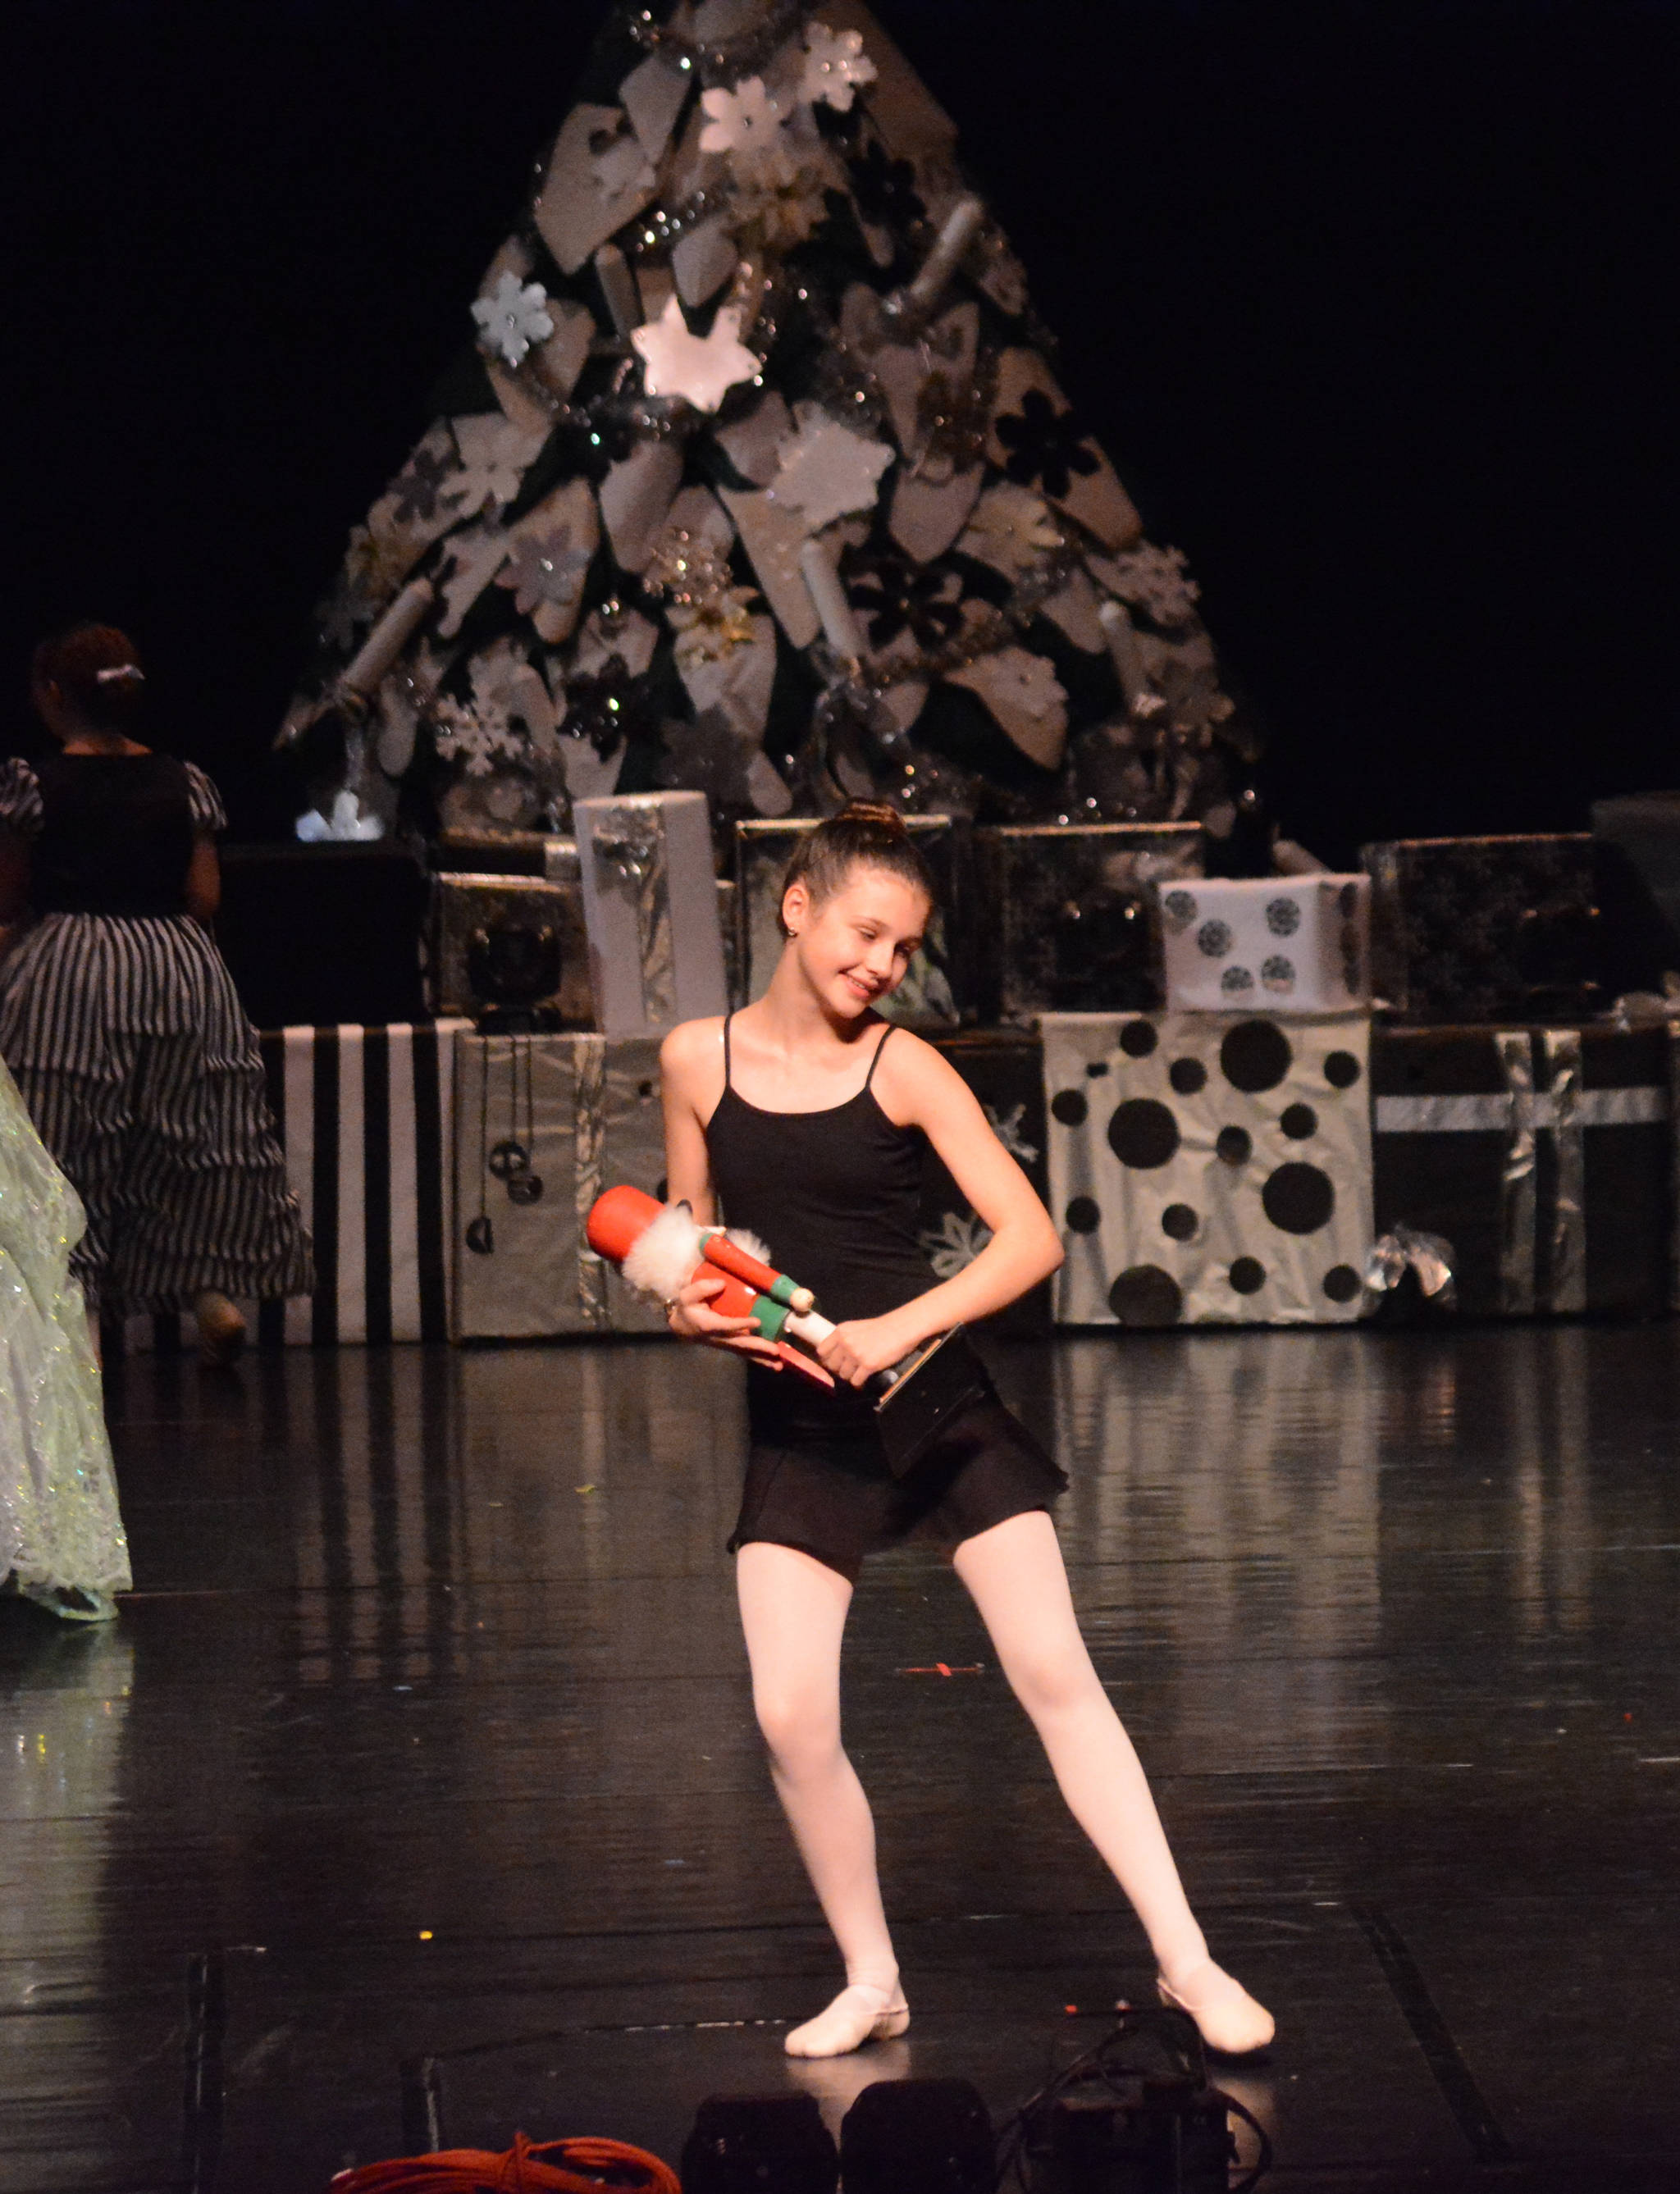 Ireland Styvar as Little Clara rehearses a scene at the Mariner Theatre Friday, Nov. 24, 2017 in Homer, Alaska for the Nutcracker Ballet. (Photo by Michael Armstrong, Homer News)